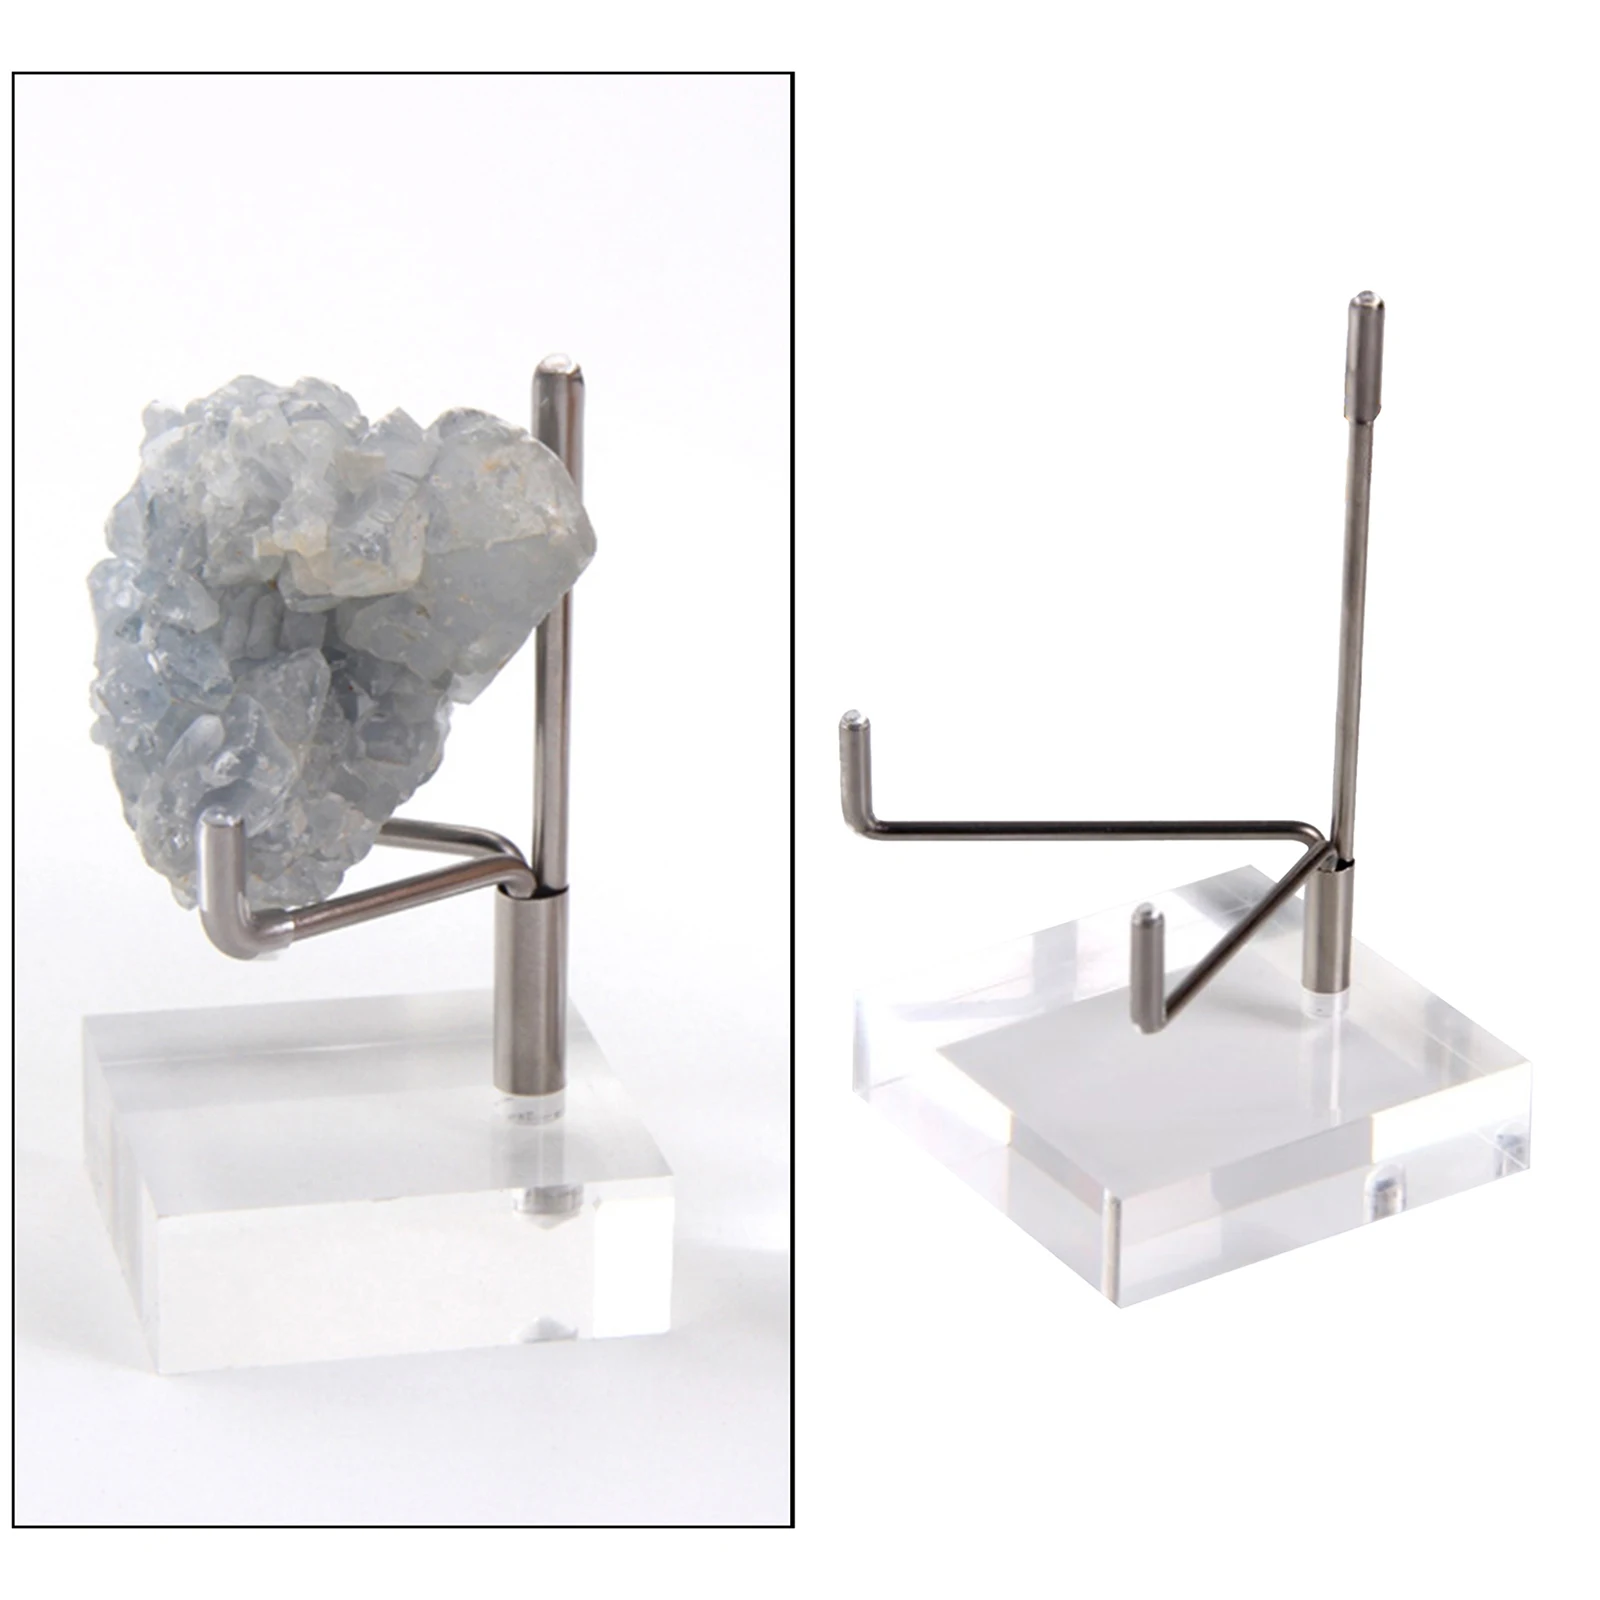 Acrylic Display Stand Metal Arm Holder Suport Square Base for Fossils Minerals Rocks Crystal Ball Collectibles Home Office Decor